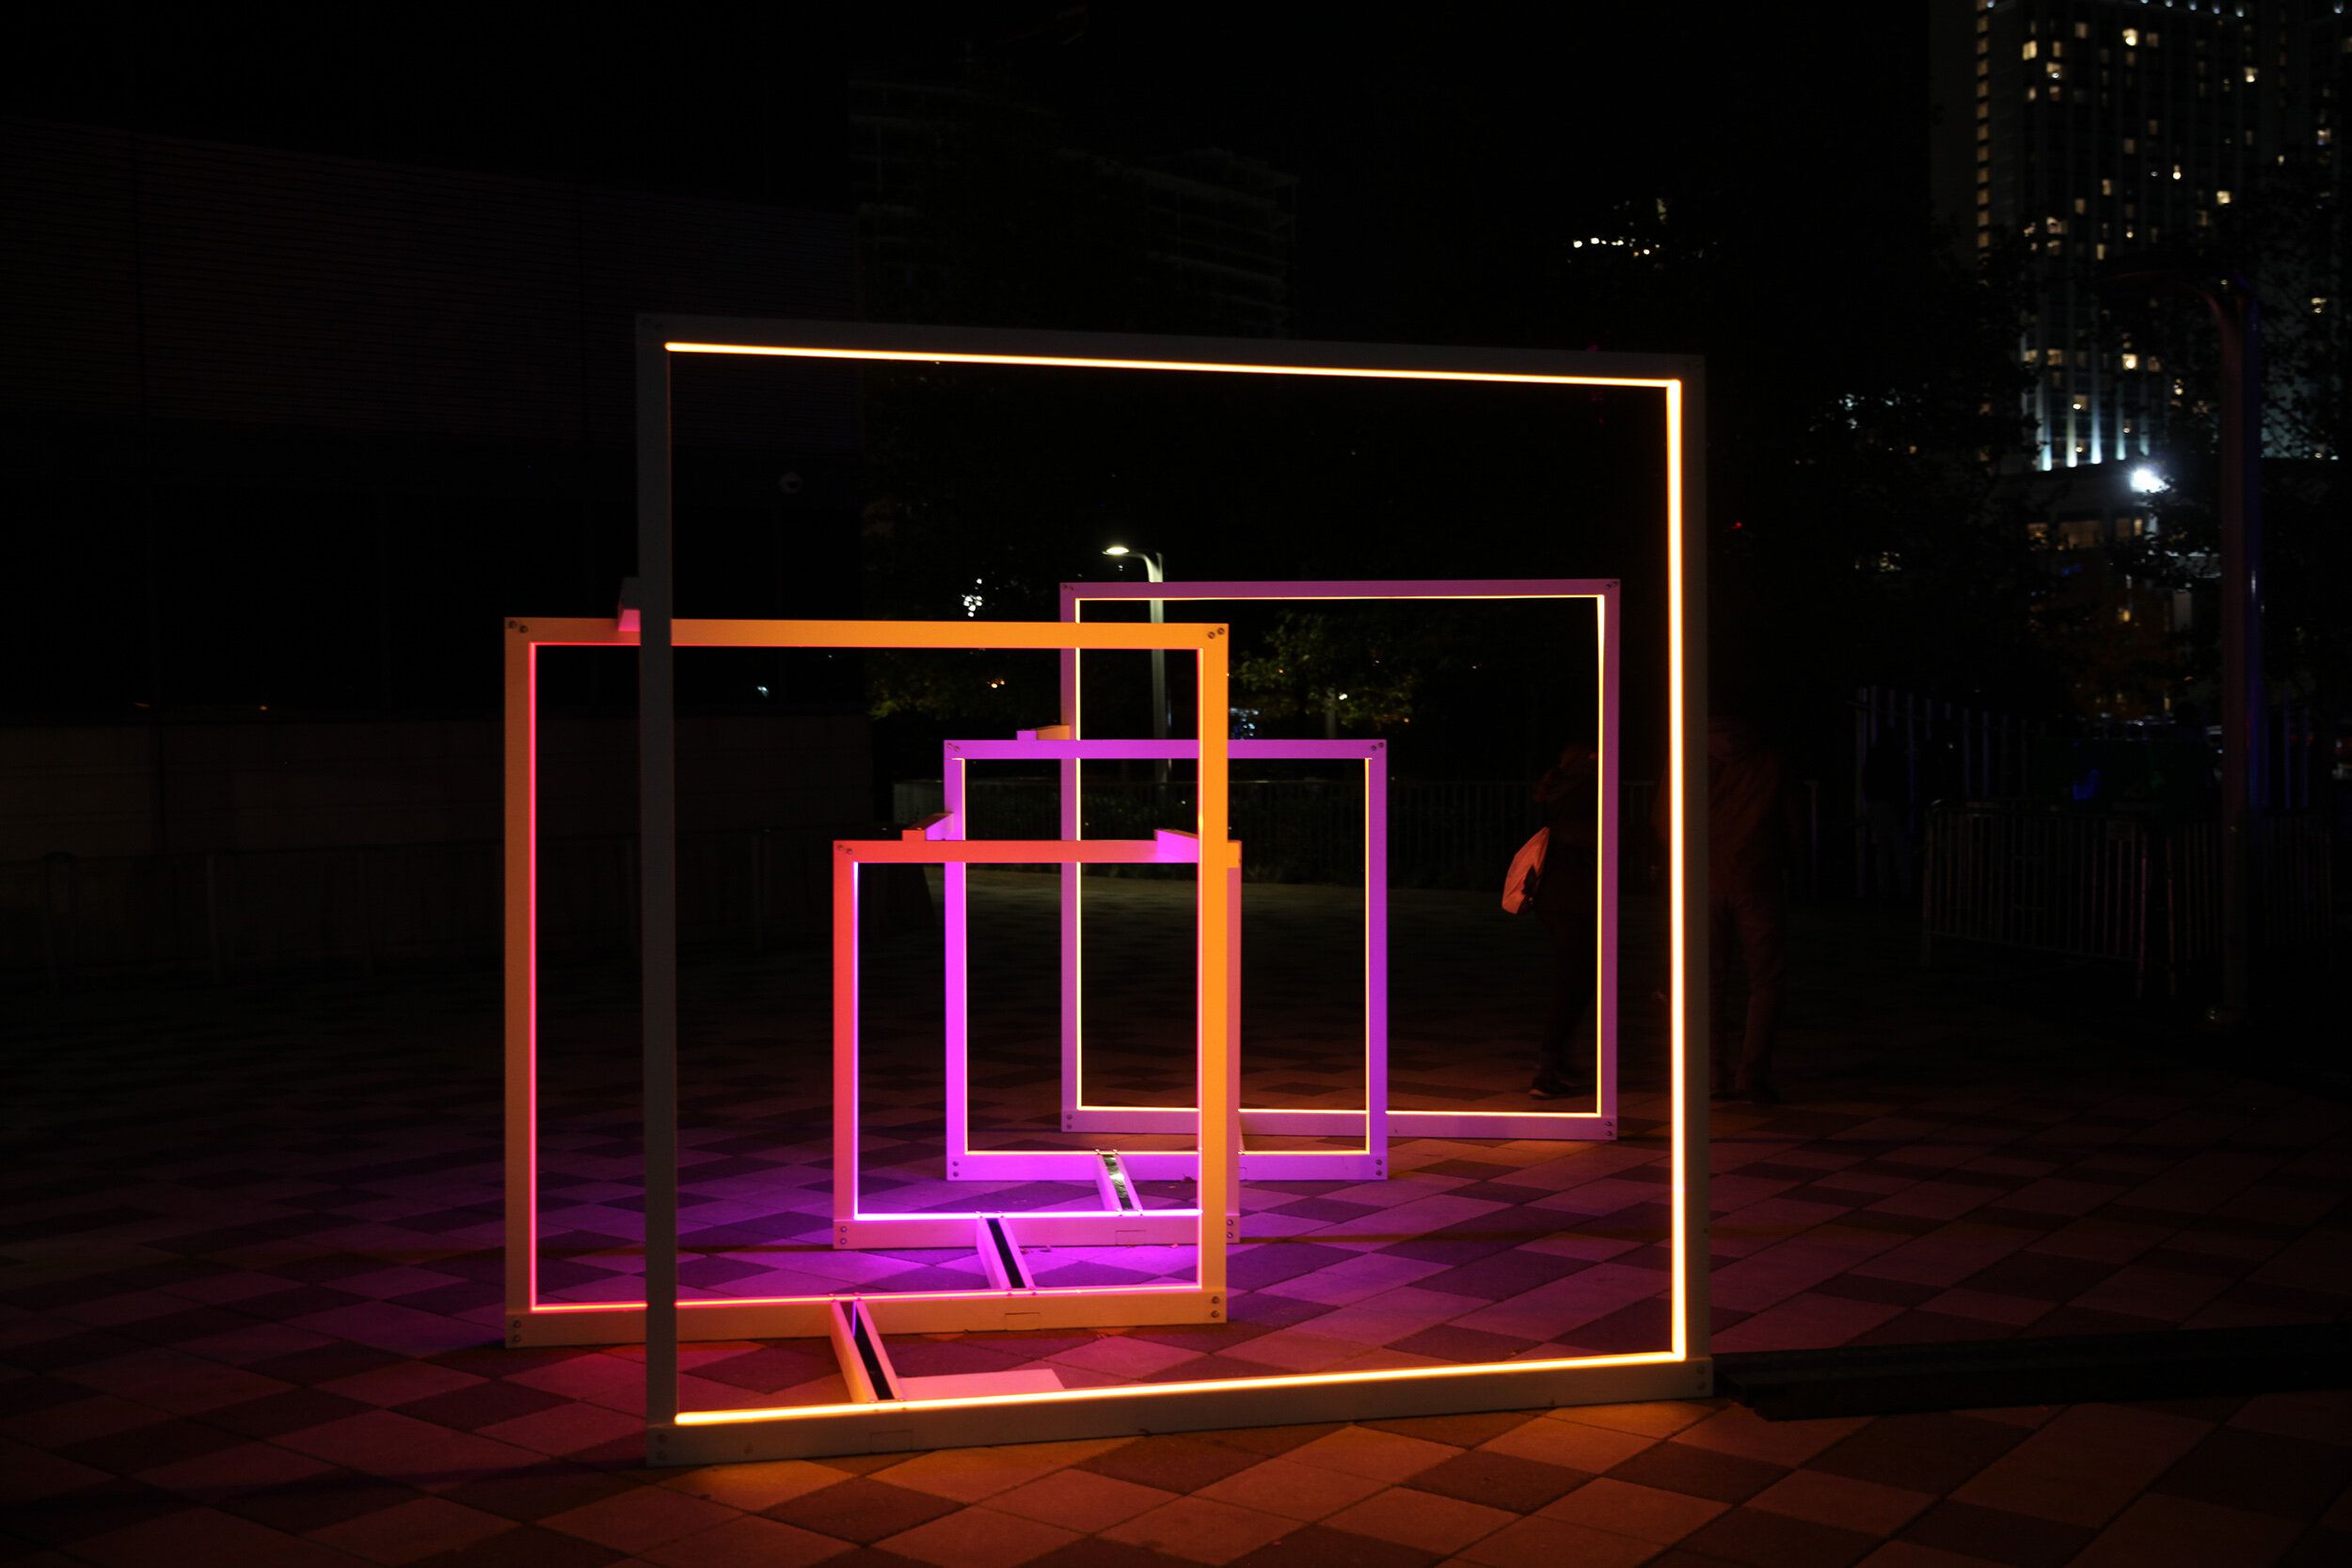  Where Pathways Meet (detail view of Portal at night), 2019, Laser cut acrylic, wood, LED lights. 8' x 8' x 12'. Collaborative project with Sutton Demlong for Baltimore Light City Festival Commission. Installation view at Pierce Park, Pier 5, Baltimo